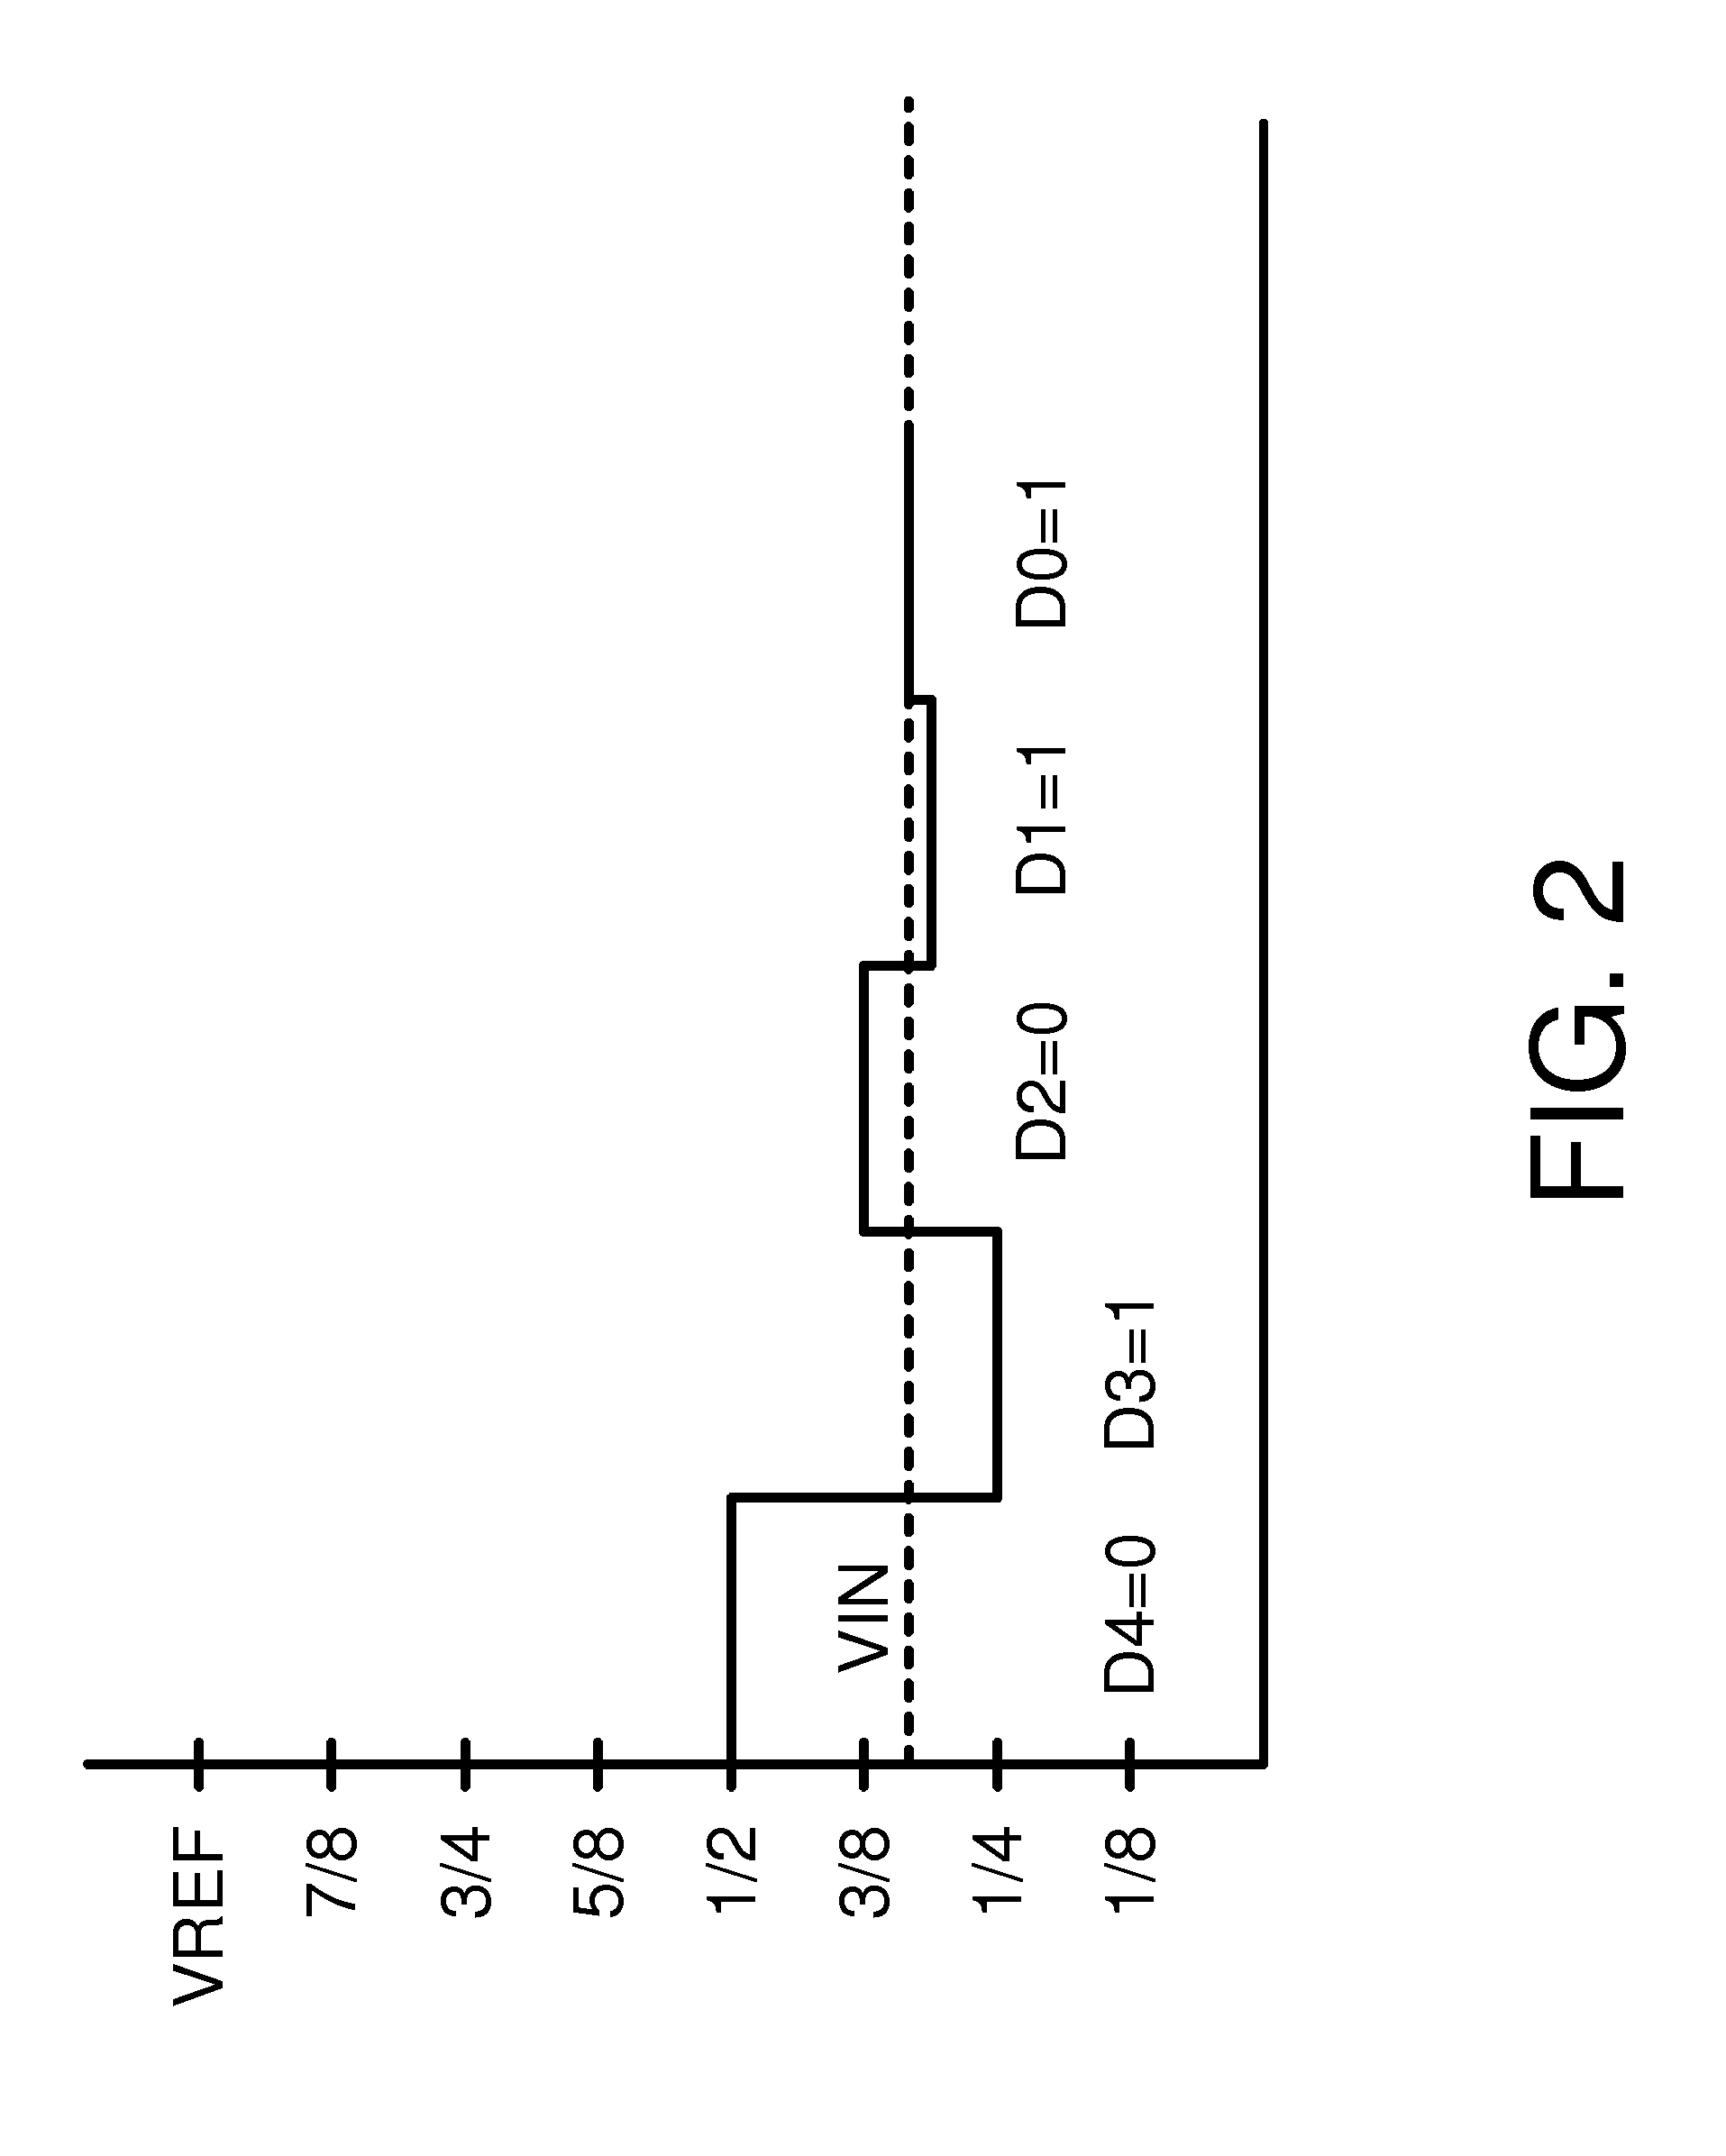 Charge compensation calibration for high resolution data converter